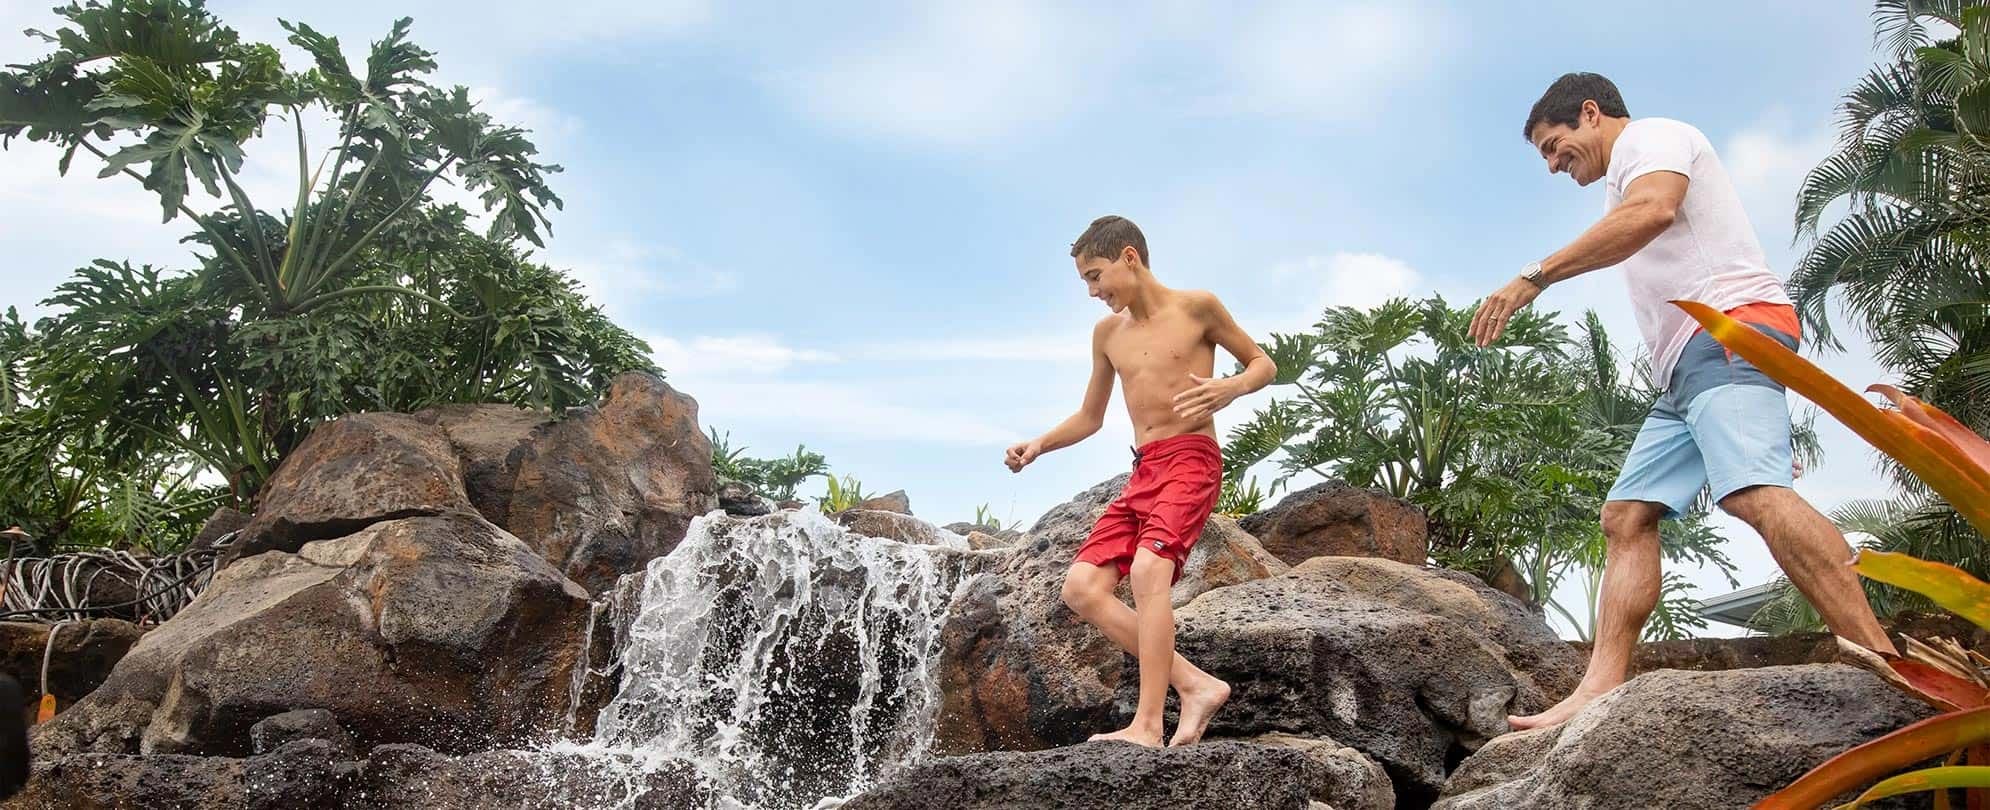 Dad and preteen boy walk on rocks in front of a waterfall during a tropical vacation.